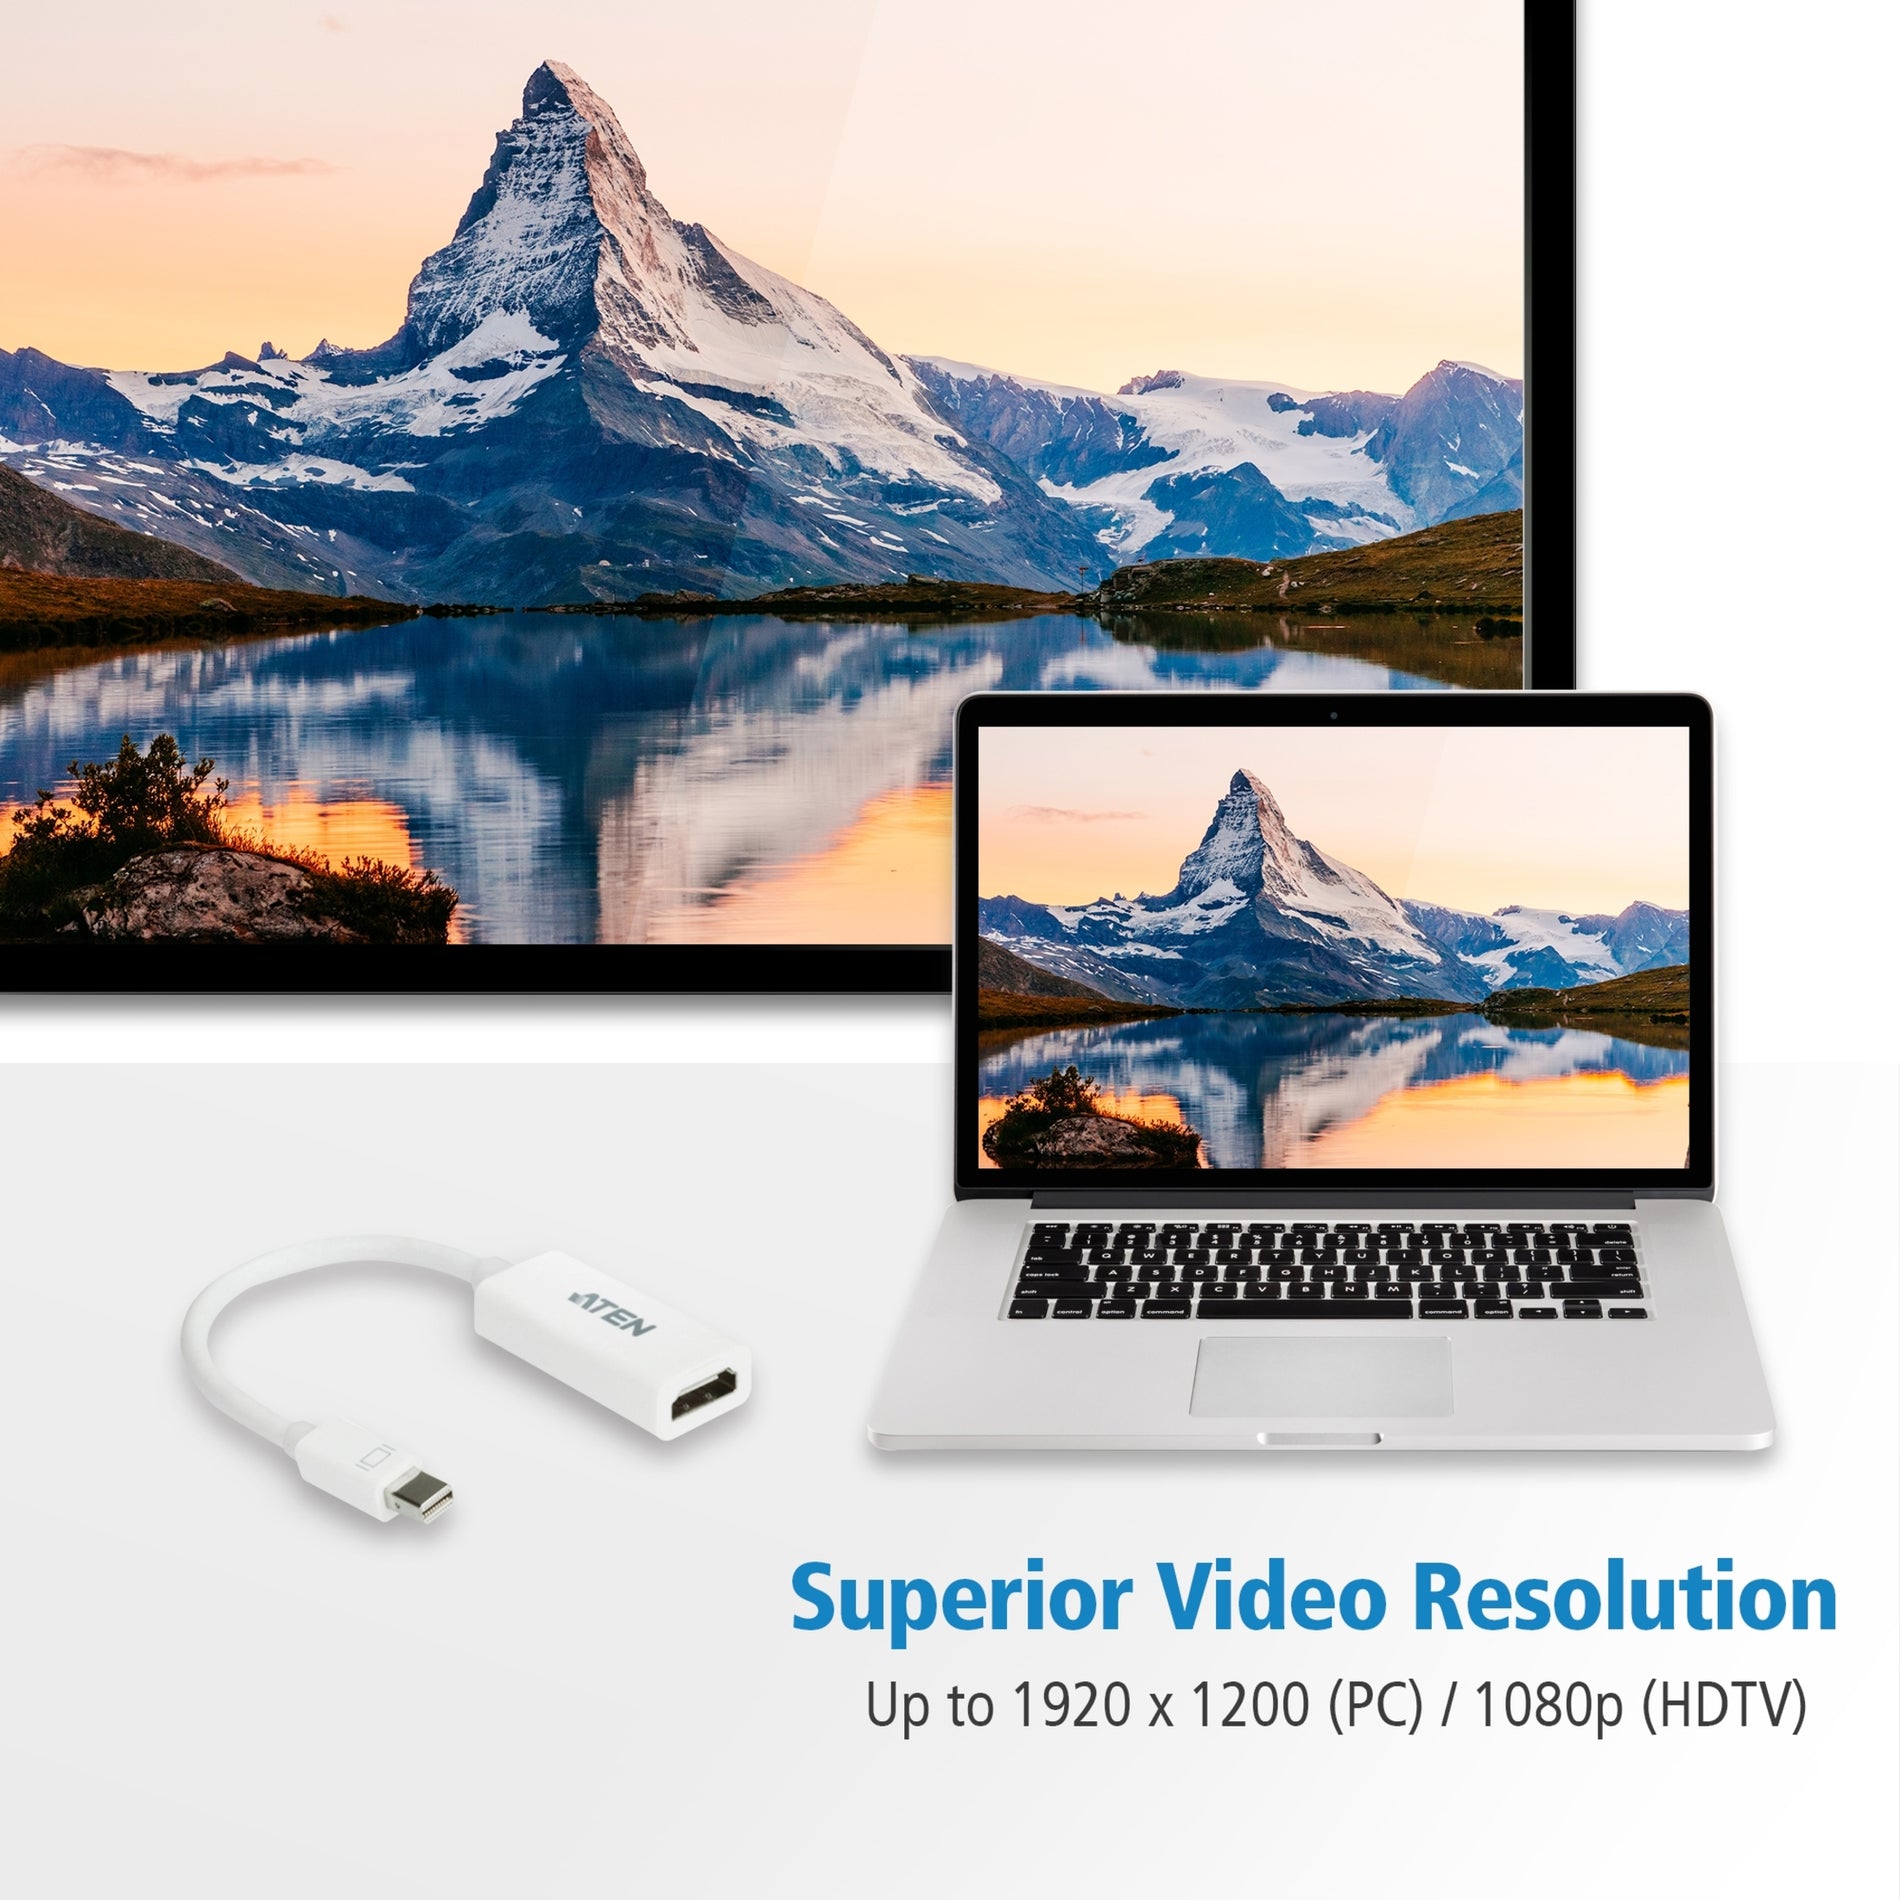 VanCryst VC980 Mini DisplayPort to HDMI Adapter, Connect Your Mac to HDMI Display